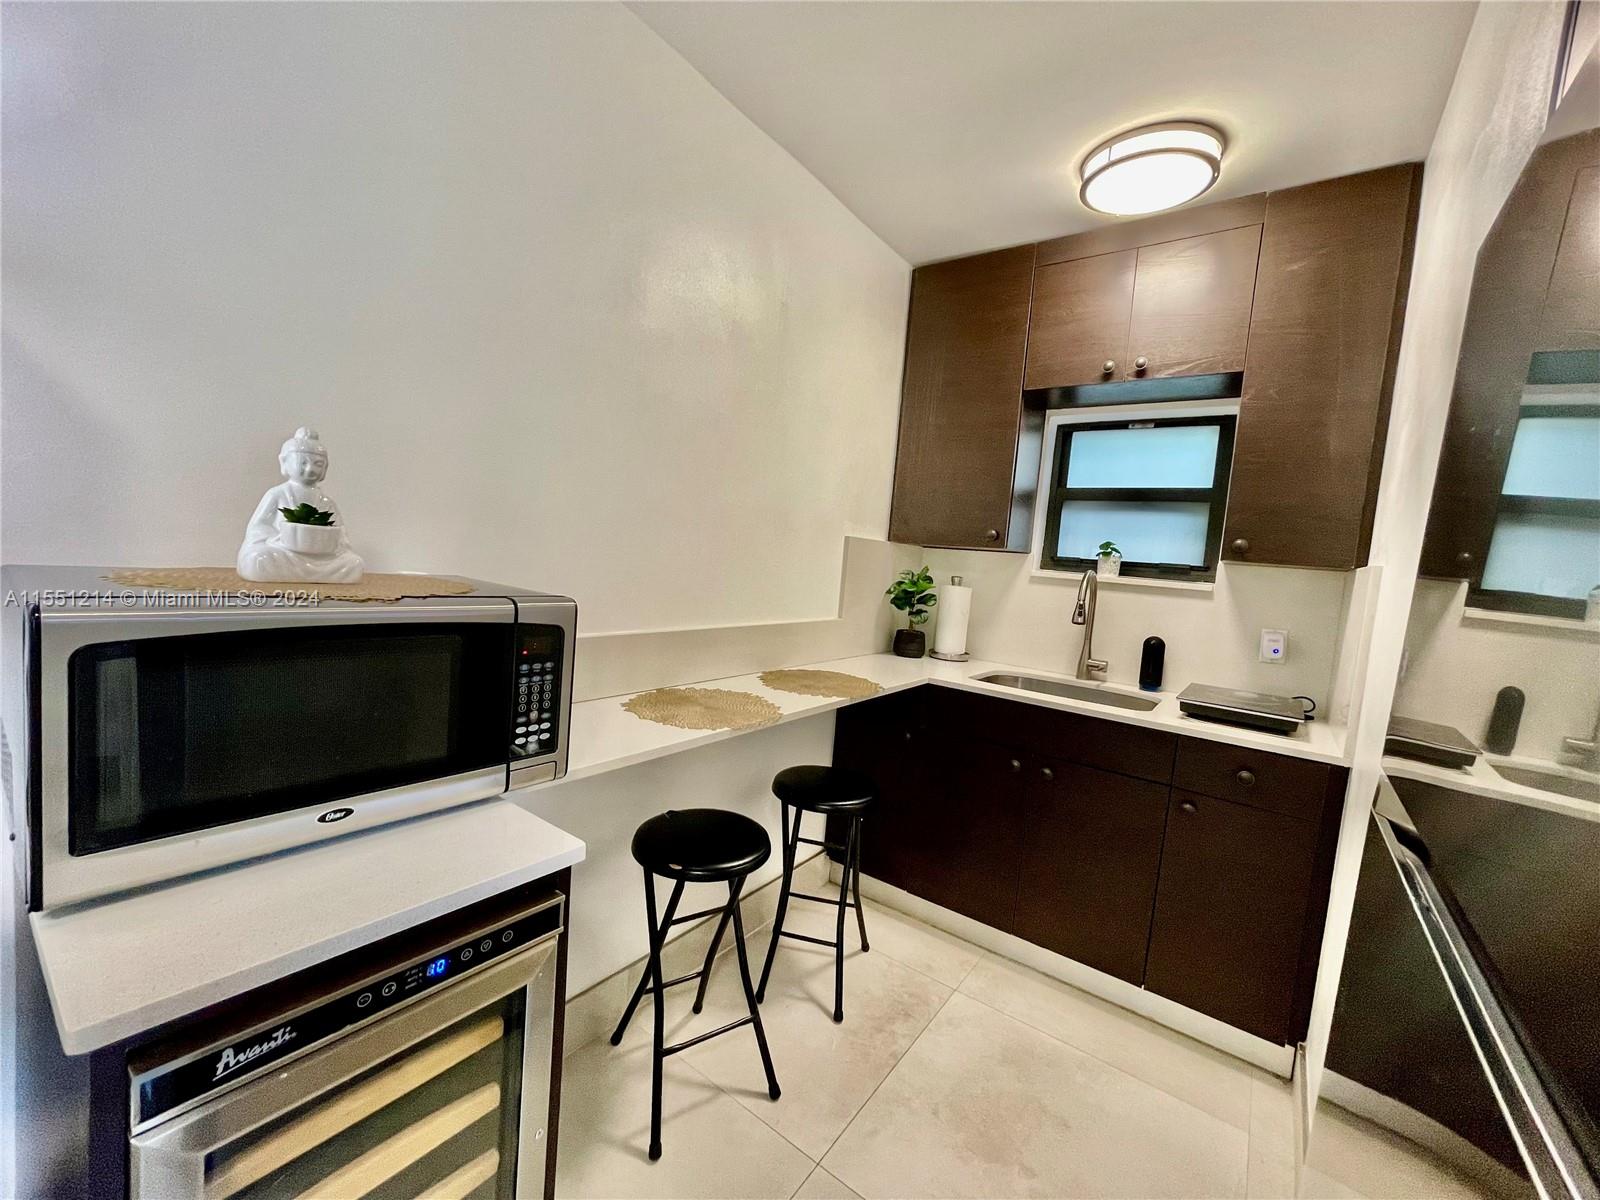 38 NW 52nd St 1, Miami, Florida 33127, 1 Bedroom Bedrooms, ,1 BathroomBathrooms,Residentiallease,For Rent,38 NW 52nd St 1,A11551214